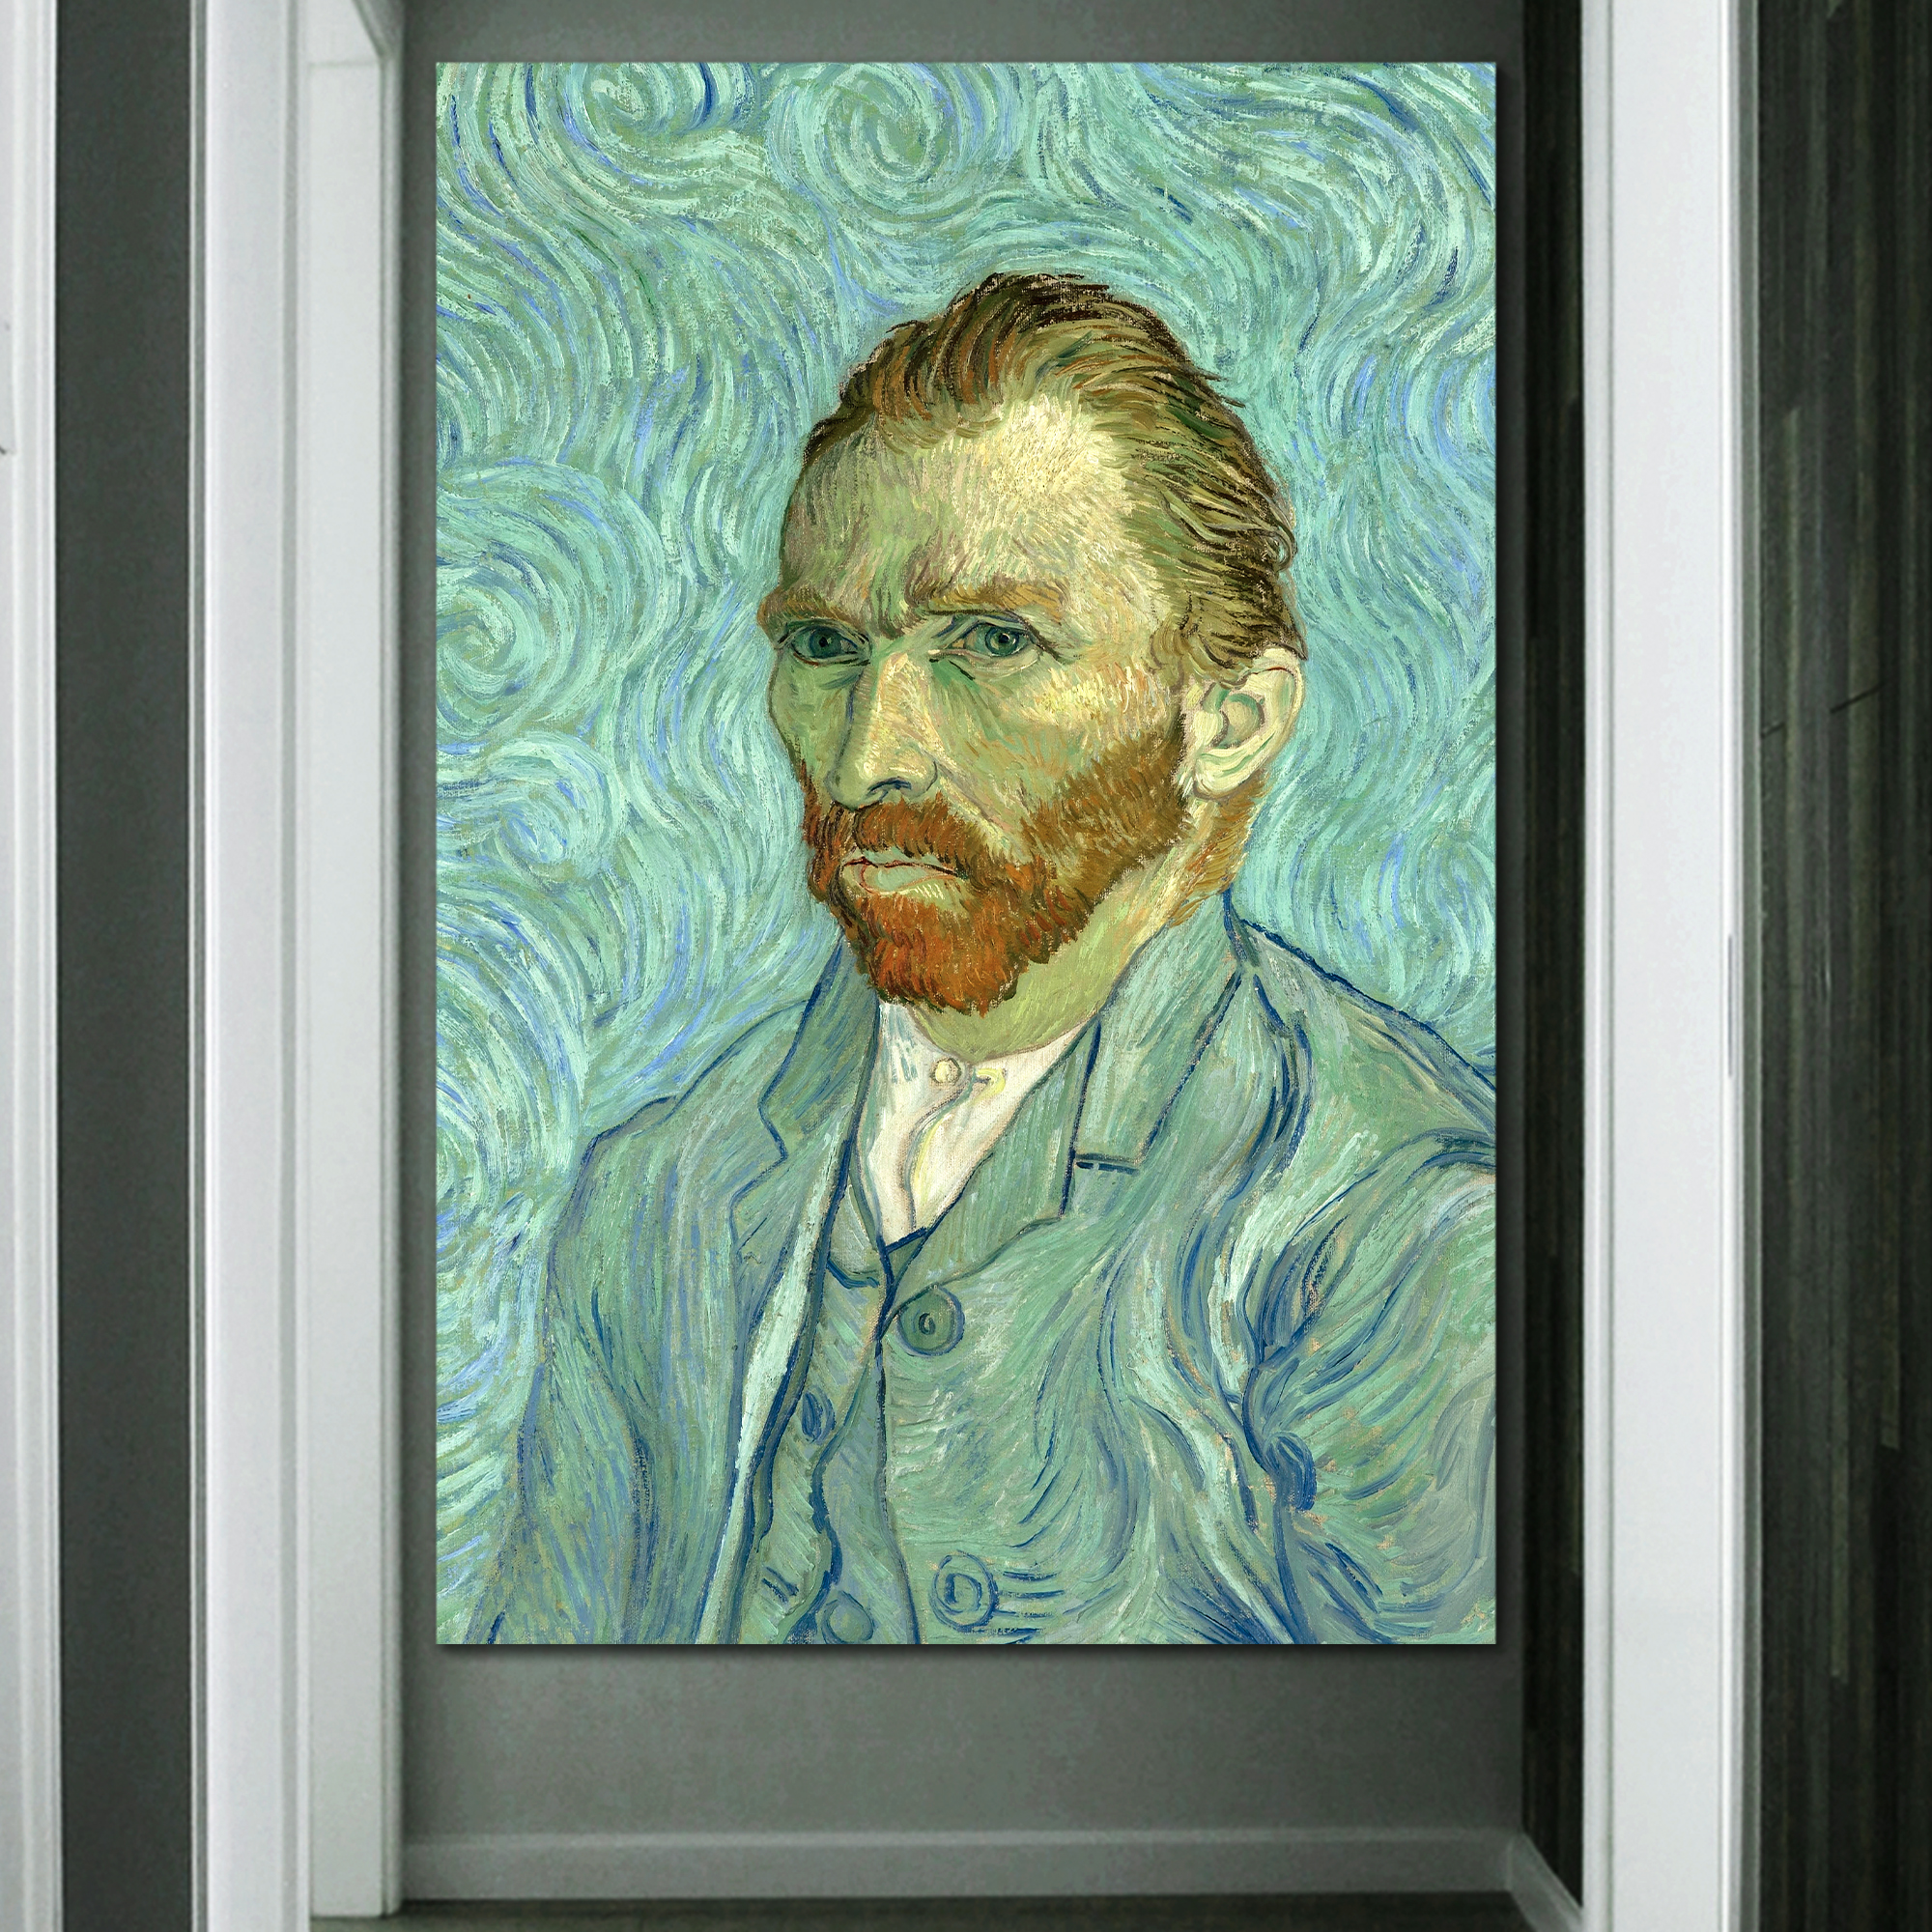 Portrait of Vincent Van Gogh - Inspirational Famous People Series | Giclee Print Canvas Wall Art. Ready to Hang - 32